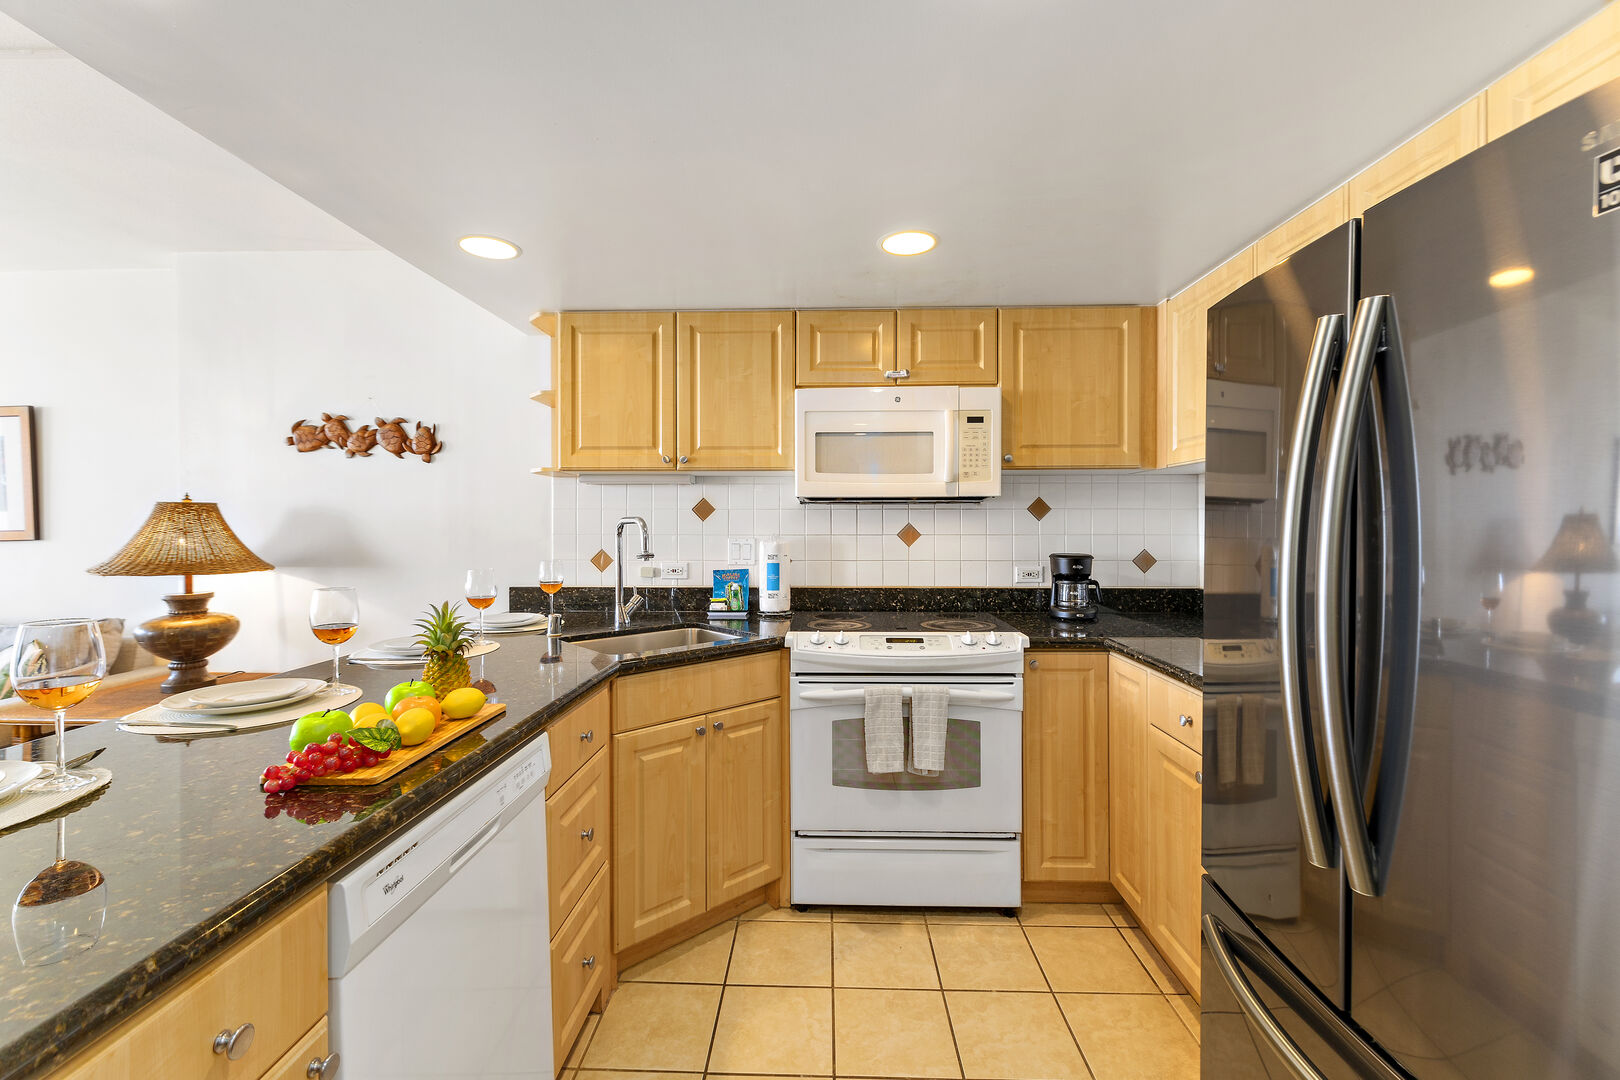 Fully equipped kitchen perfect for your culinary needs